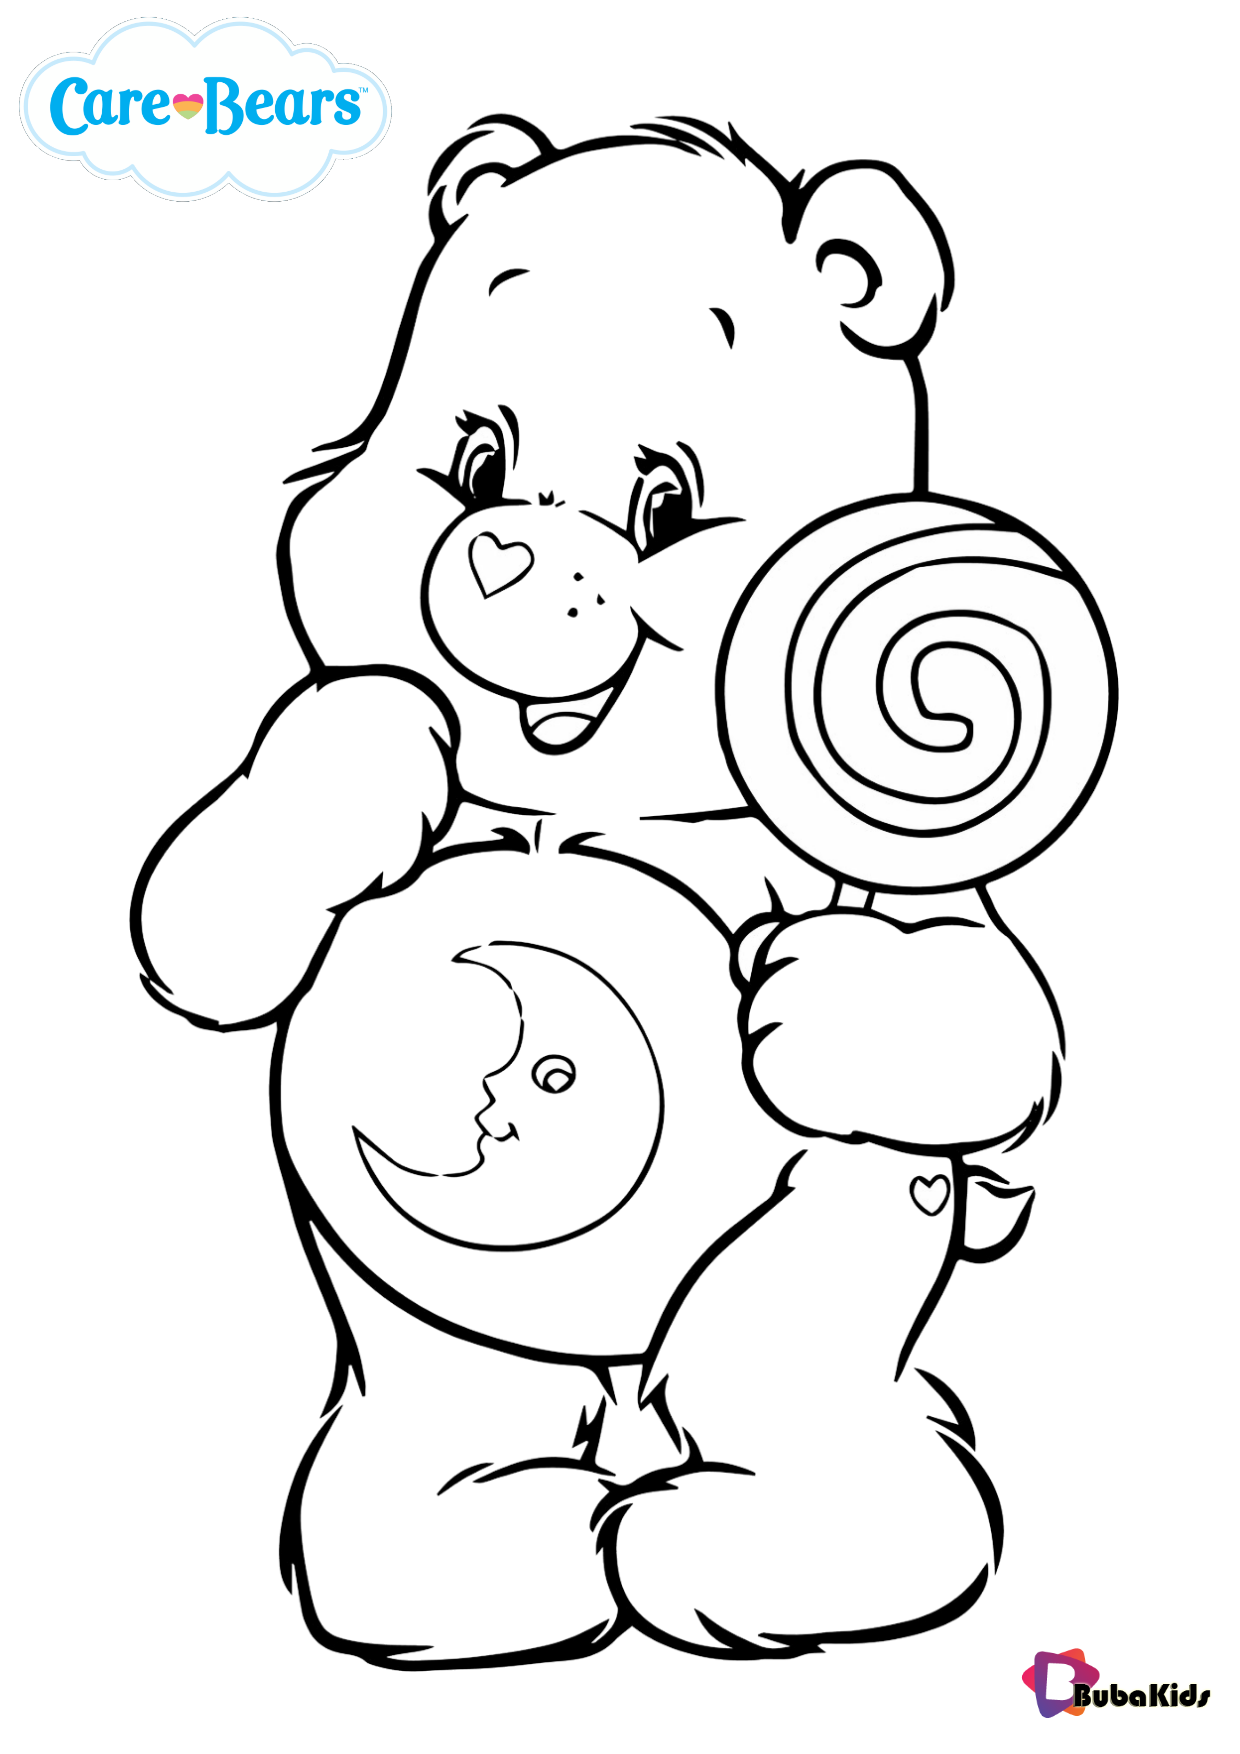 care bears coloring pages Wallpaper